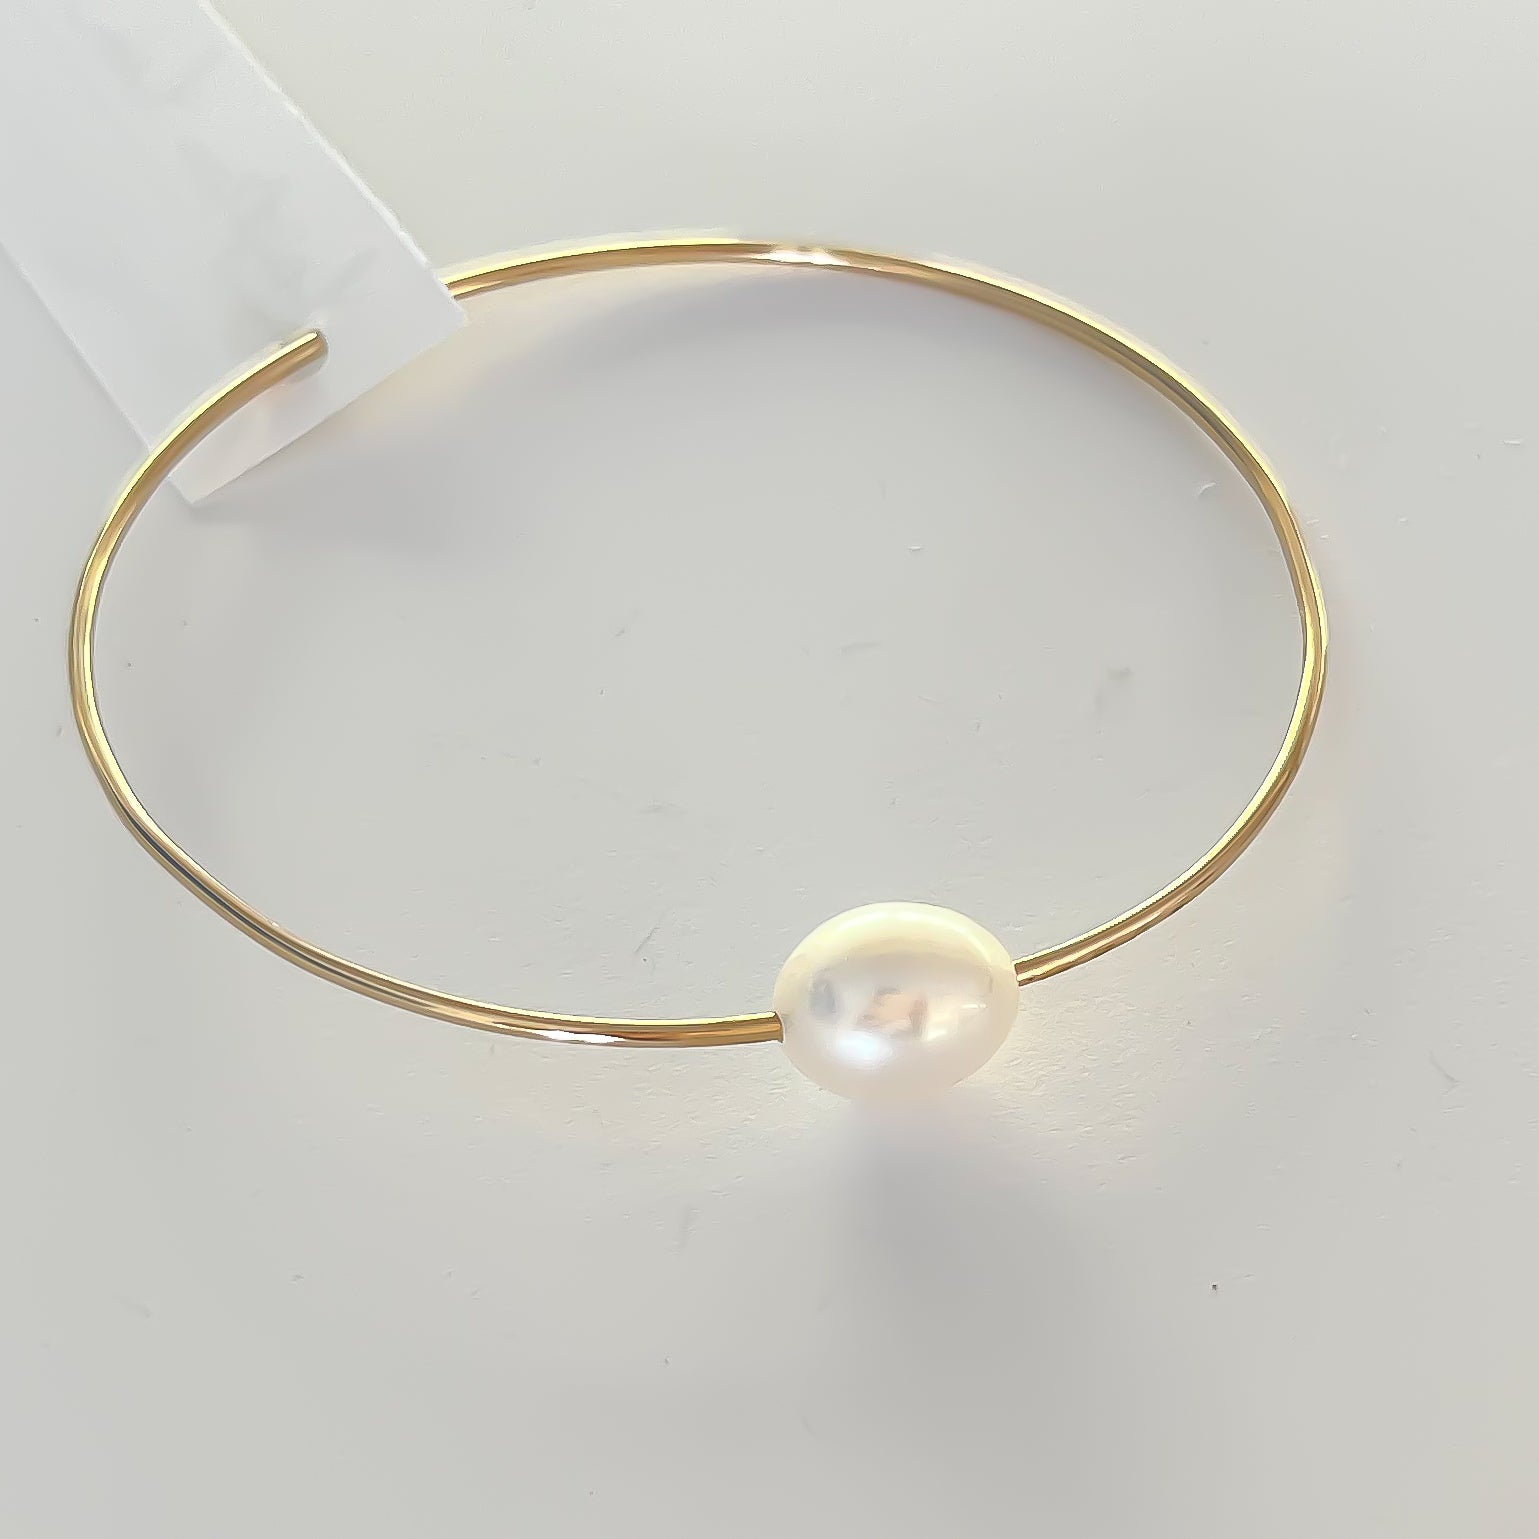 Pearl Bangles - Gold Filled